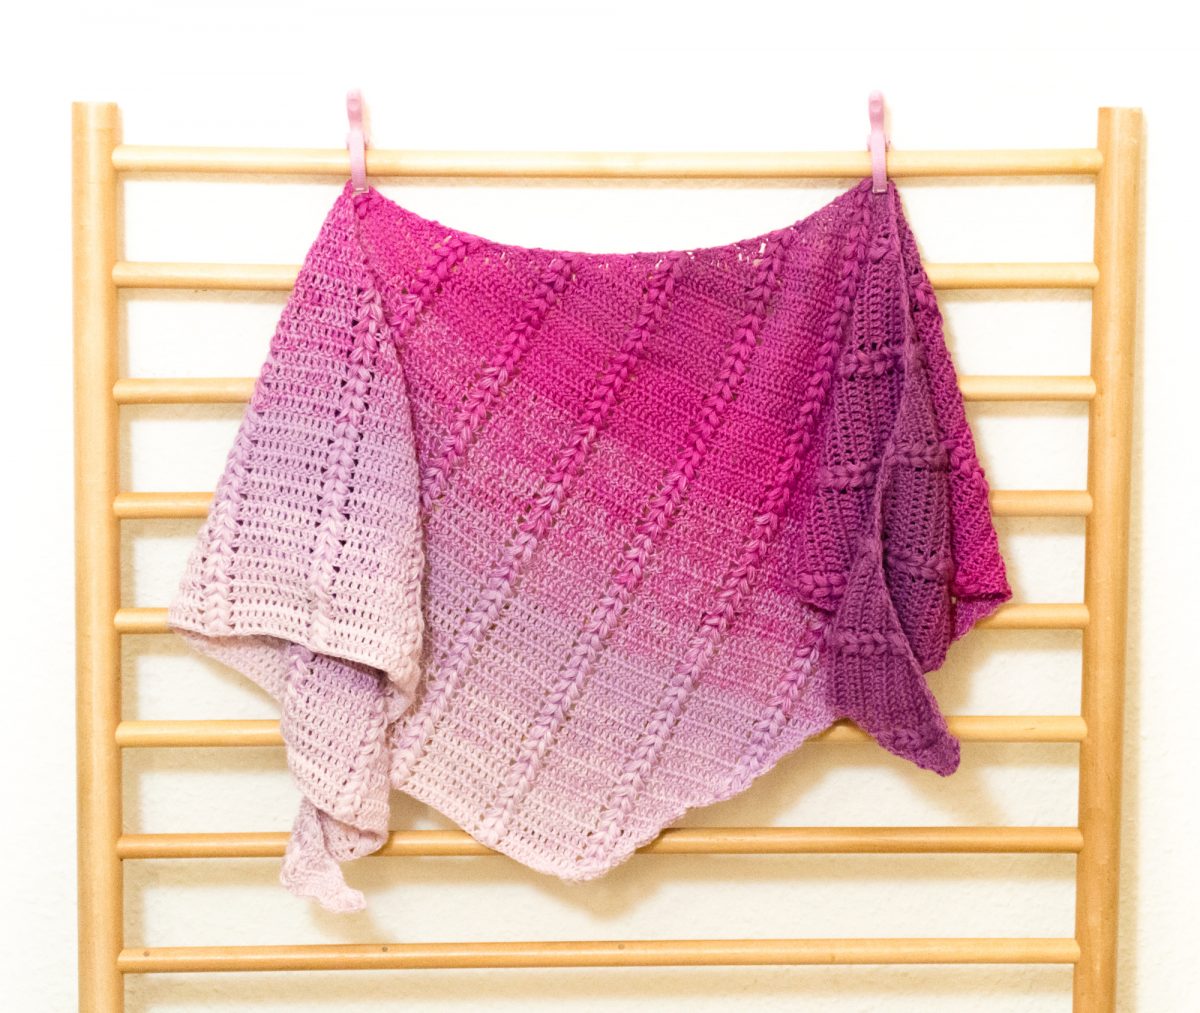 Pink to white gradient shawl draped over a wood grate